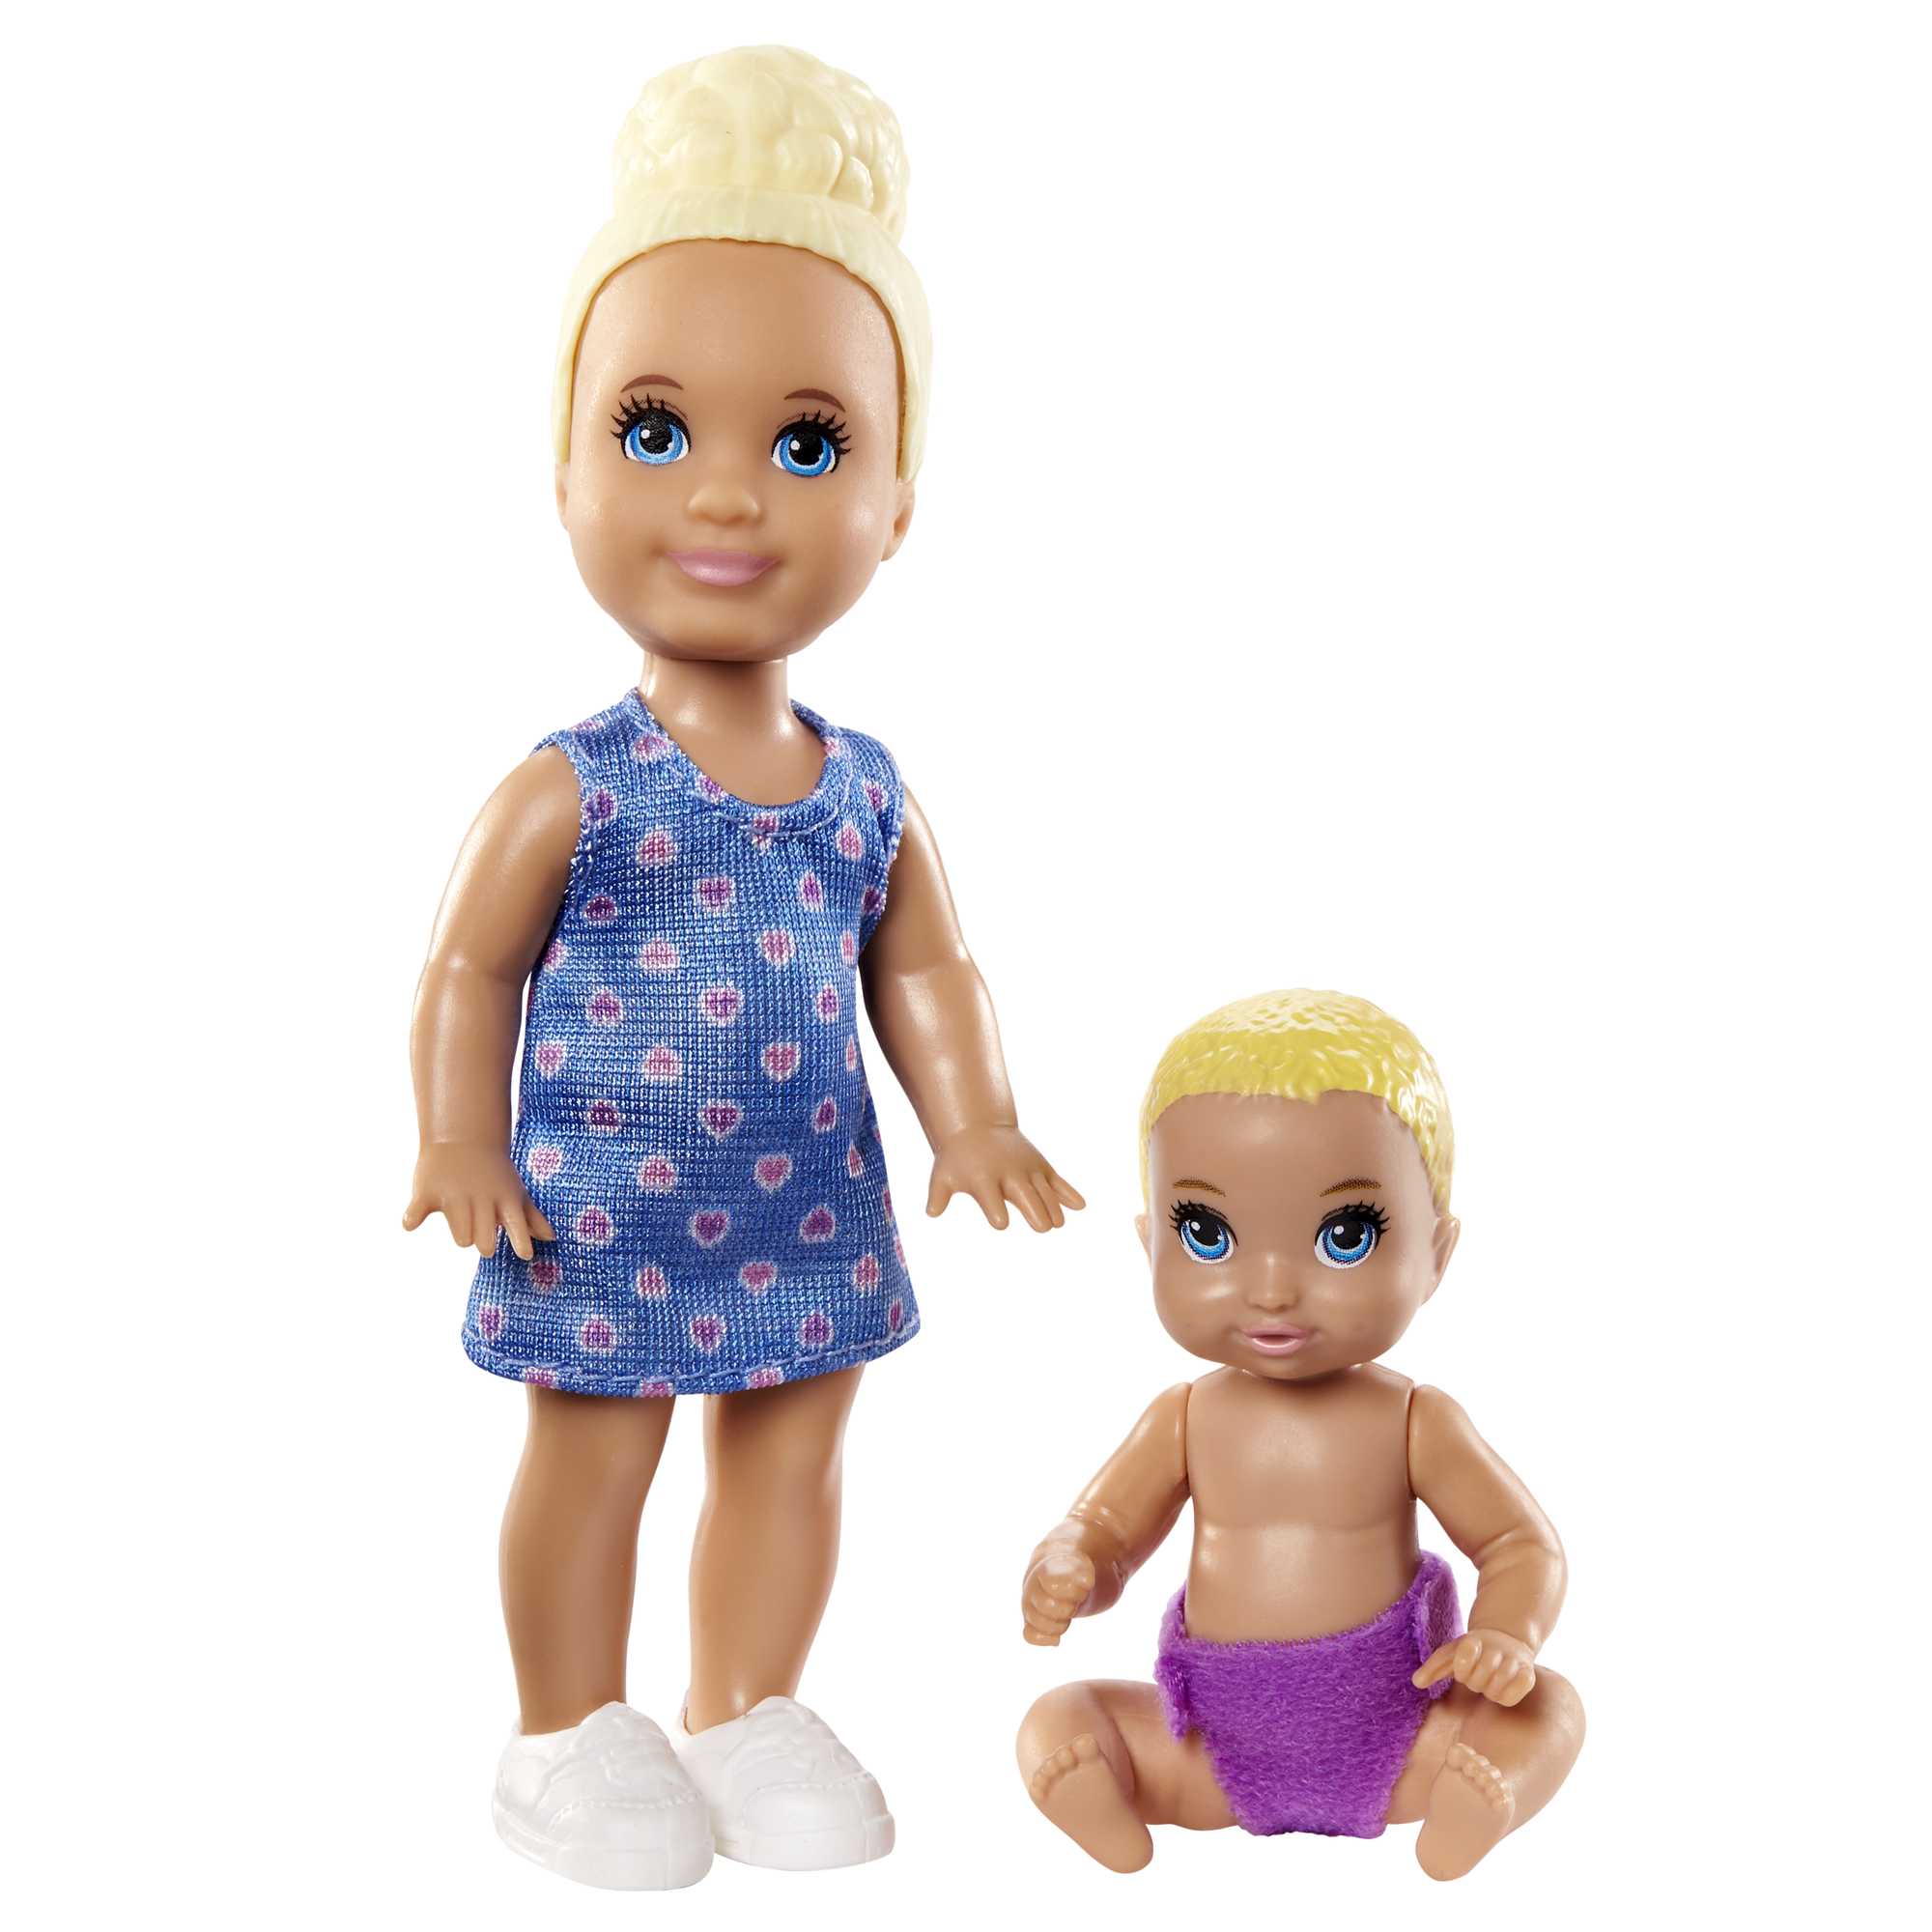  Barbie Skipper Babysitters Inc. Doll & Accessories Set with  9-in Blonde Doll, Baby Doll & 4 Storytelling Pieces for 3 to 7 Year Olds :  Toys & Games